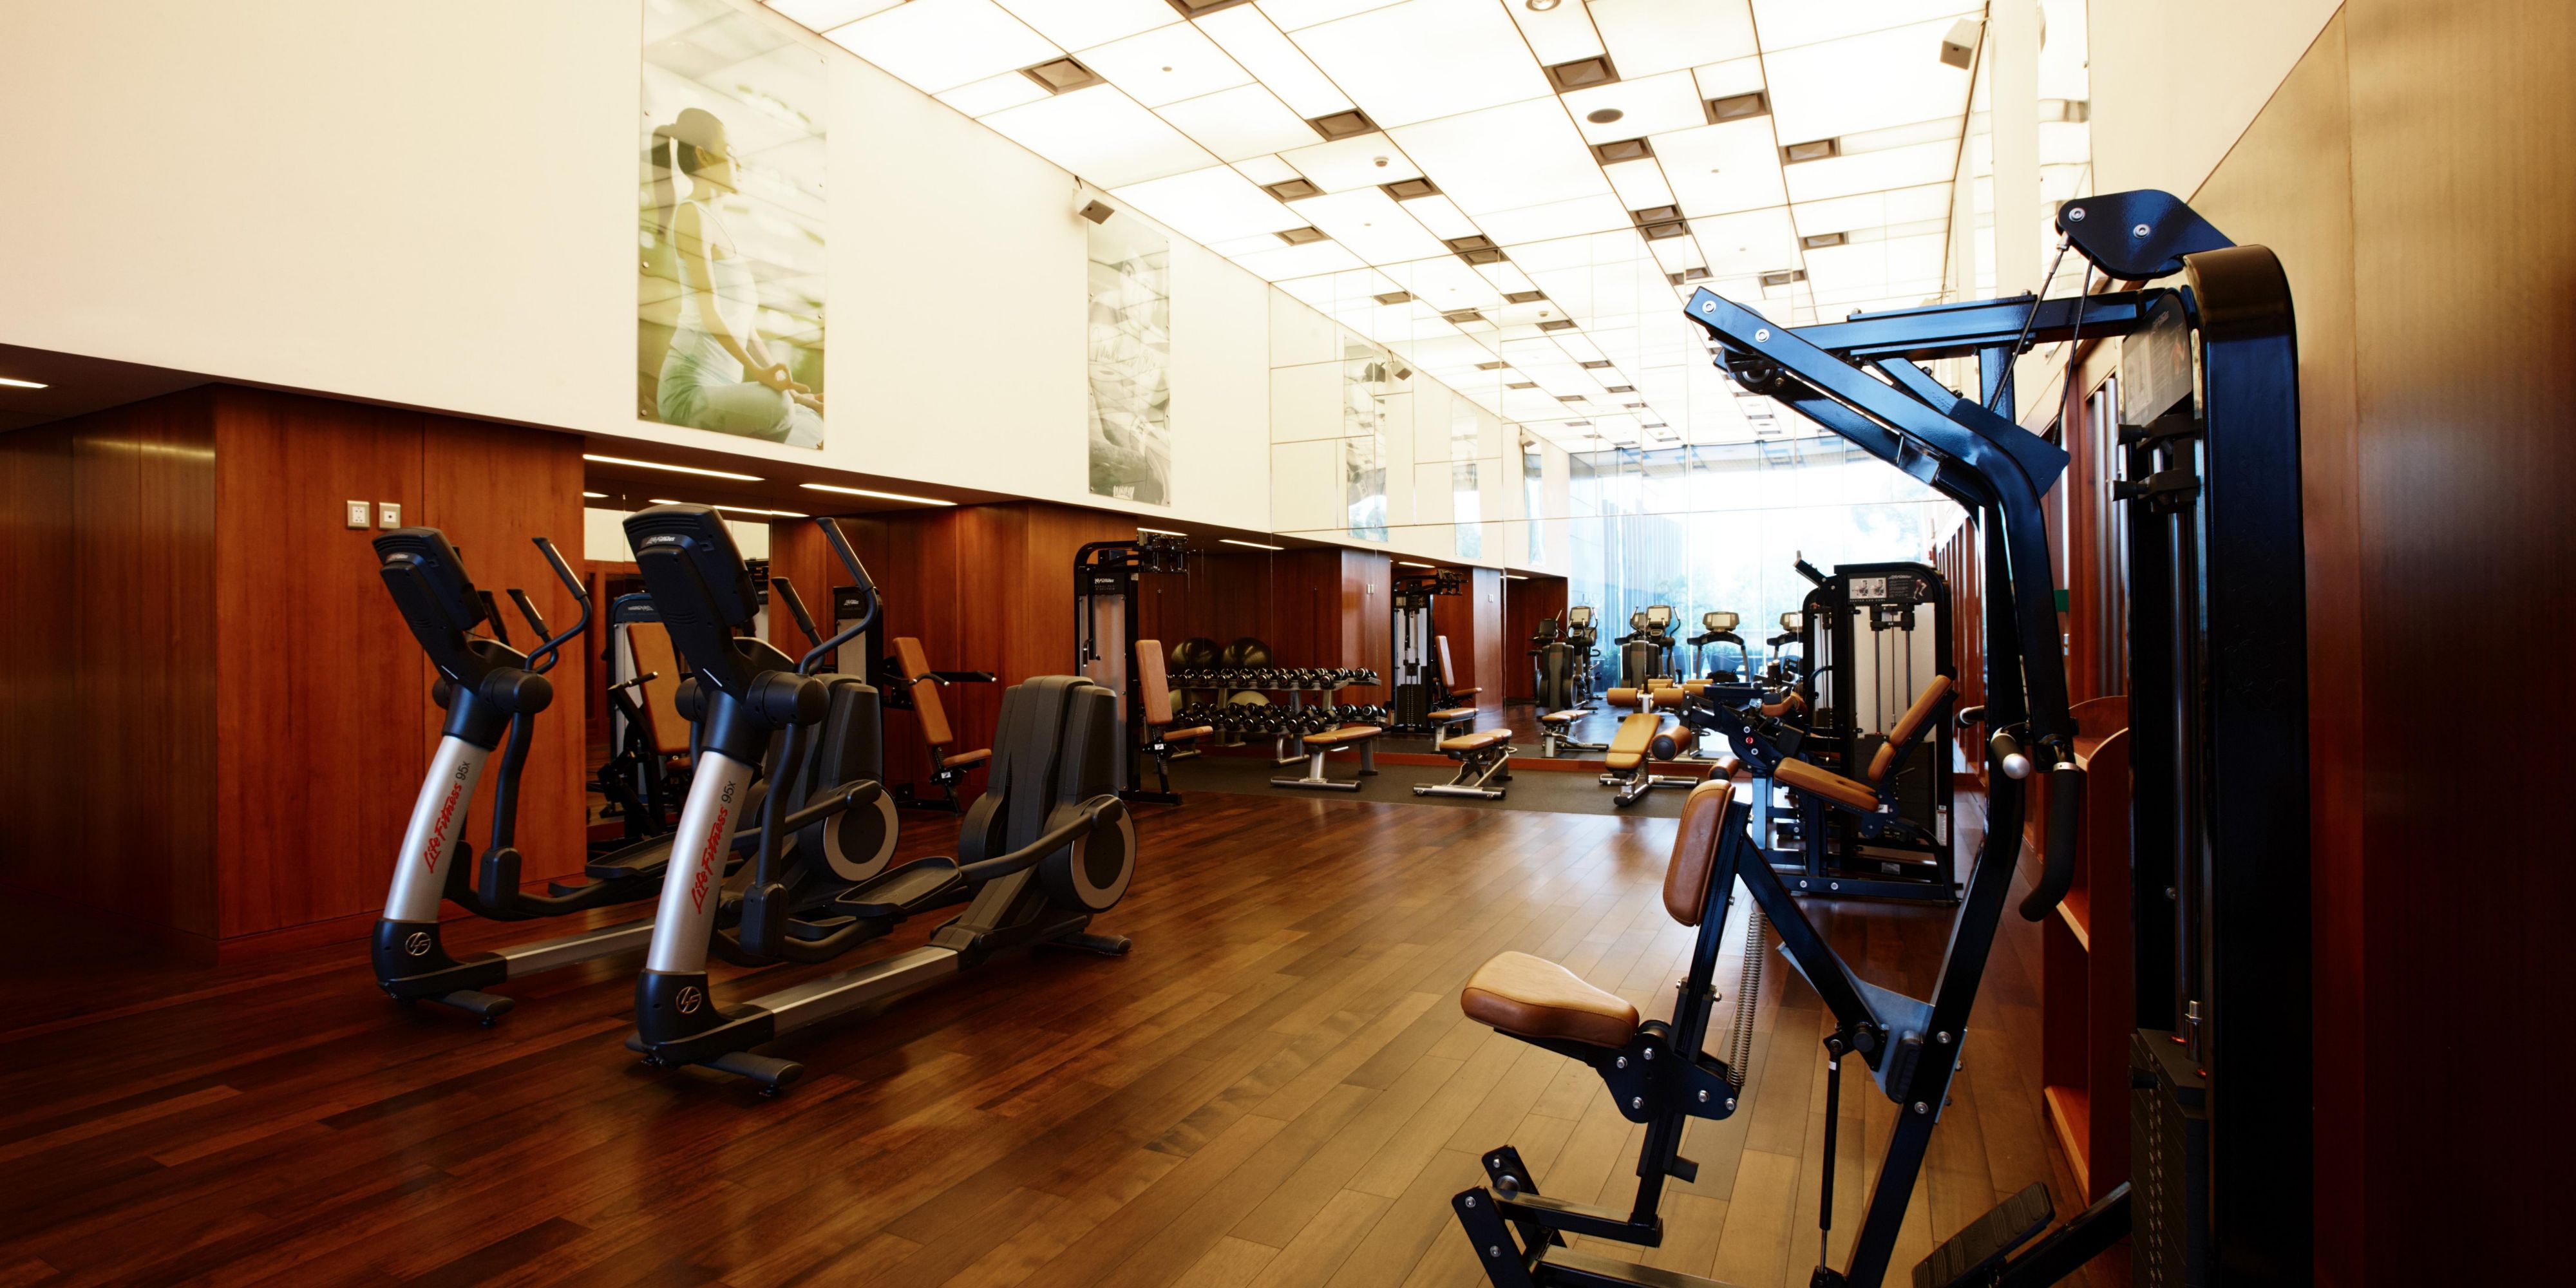 Whether you need a quick workout, or simply can't miss your daily wellness routine, our Fitness Centre is here for you 24-hours a day with the latest fitness equipment and modern media solutions.